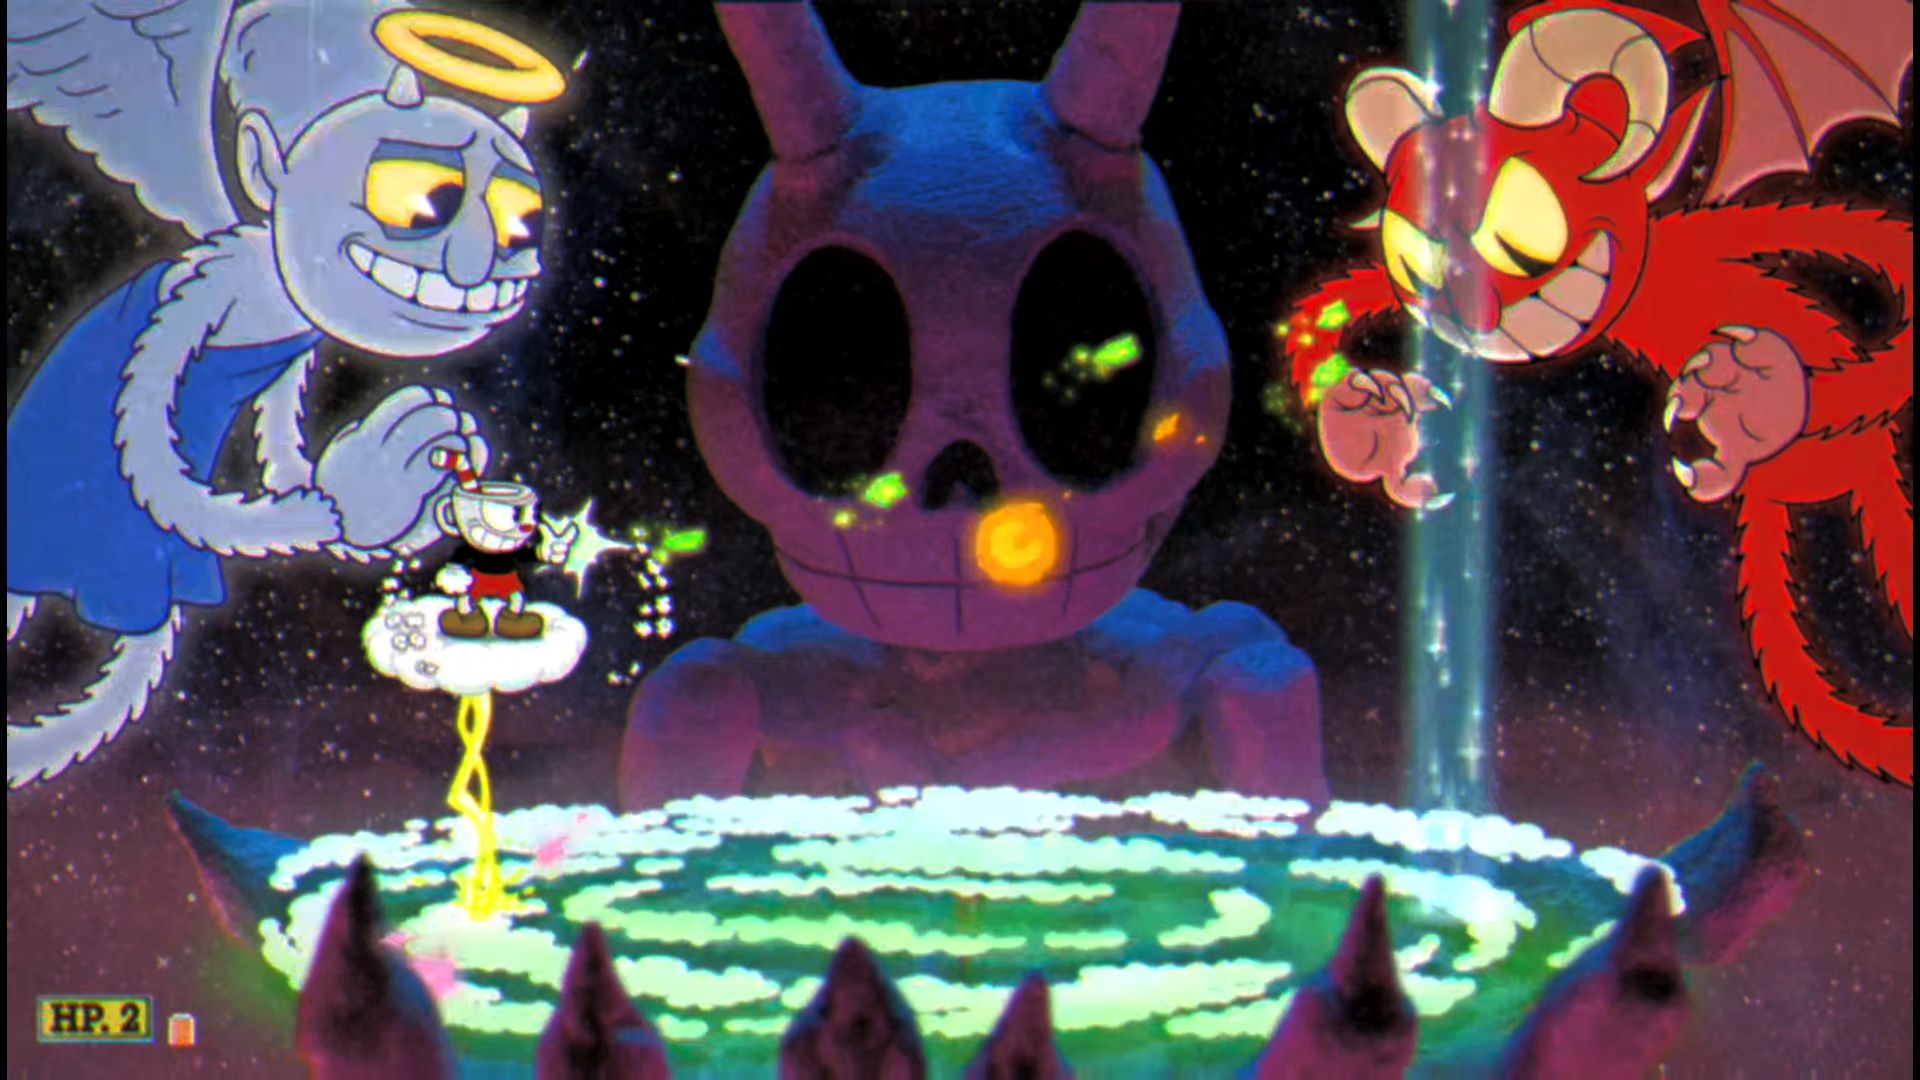 Cuphead The Delicious Course, The Angel And Devil, Shooting the Devil on a cloud